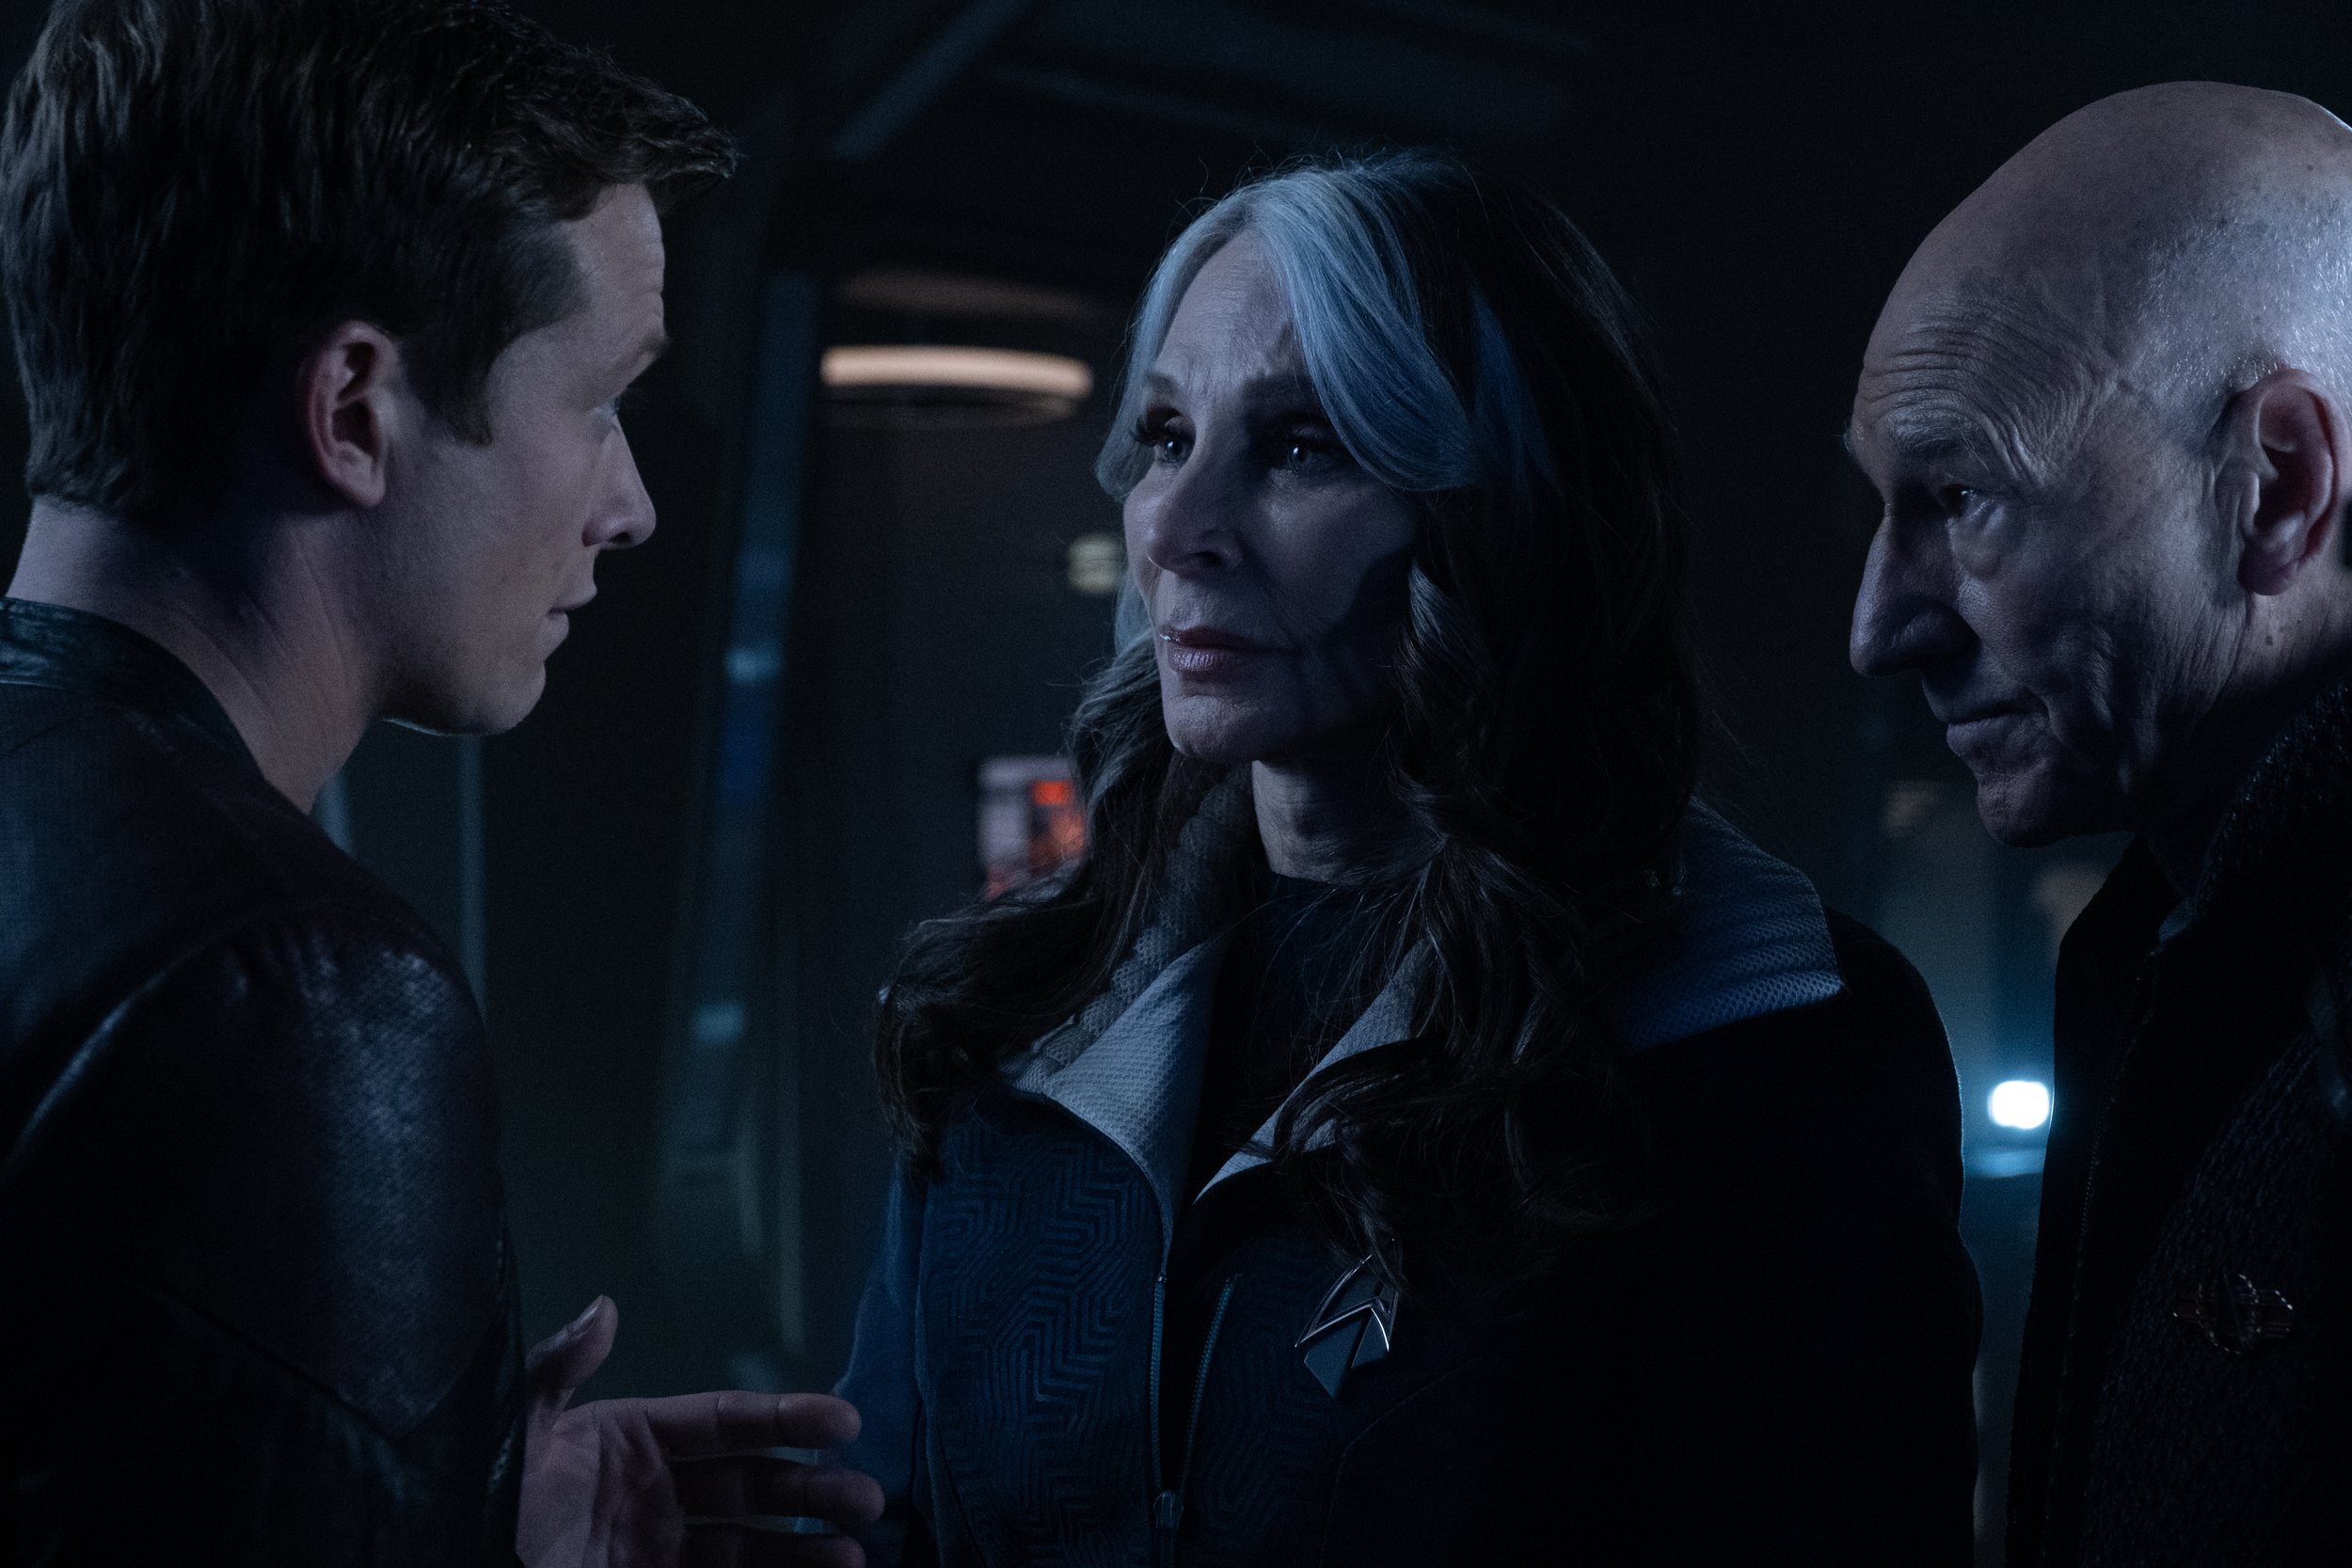   Ed Speleers  as Jack Crusher,  Gates McFadden  as Dr. Beverly Crusher and  Patrick Stewart  as Picard.  Photo Credit: Trae Patton/Paramount+.  